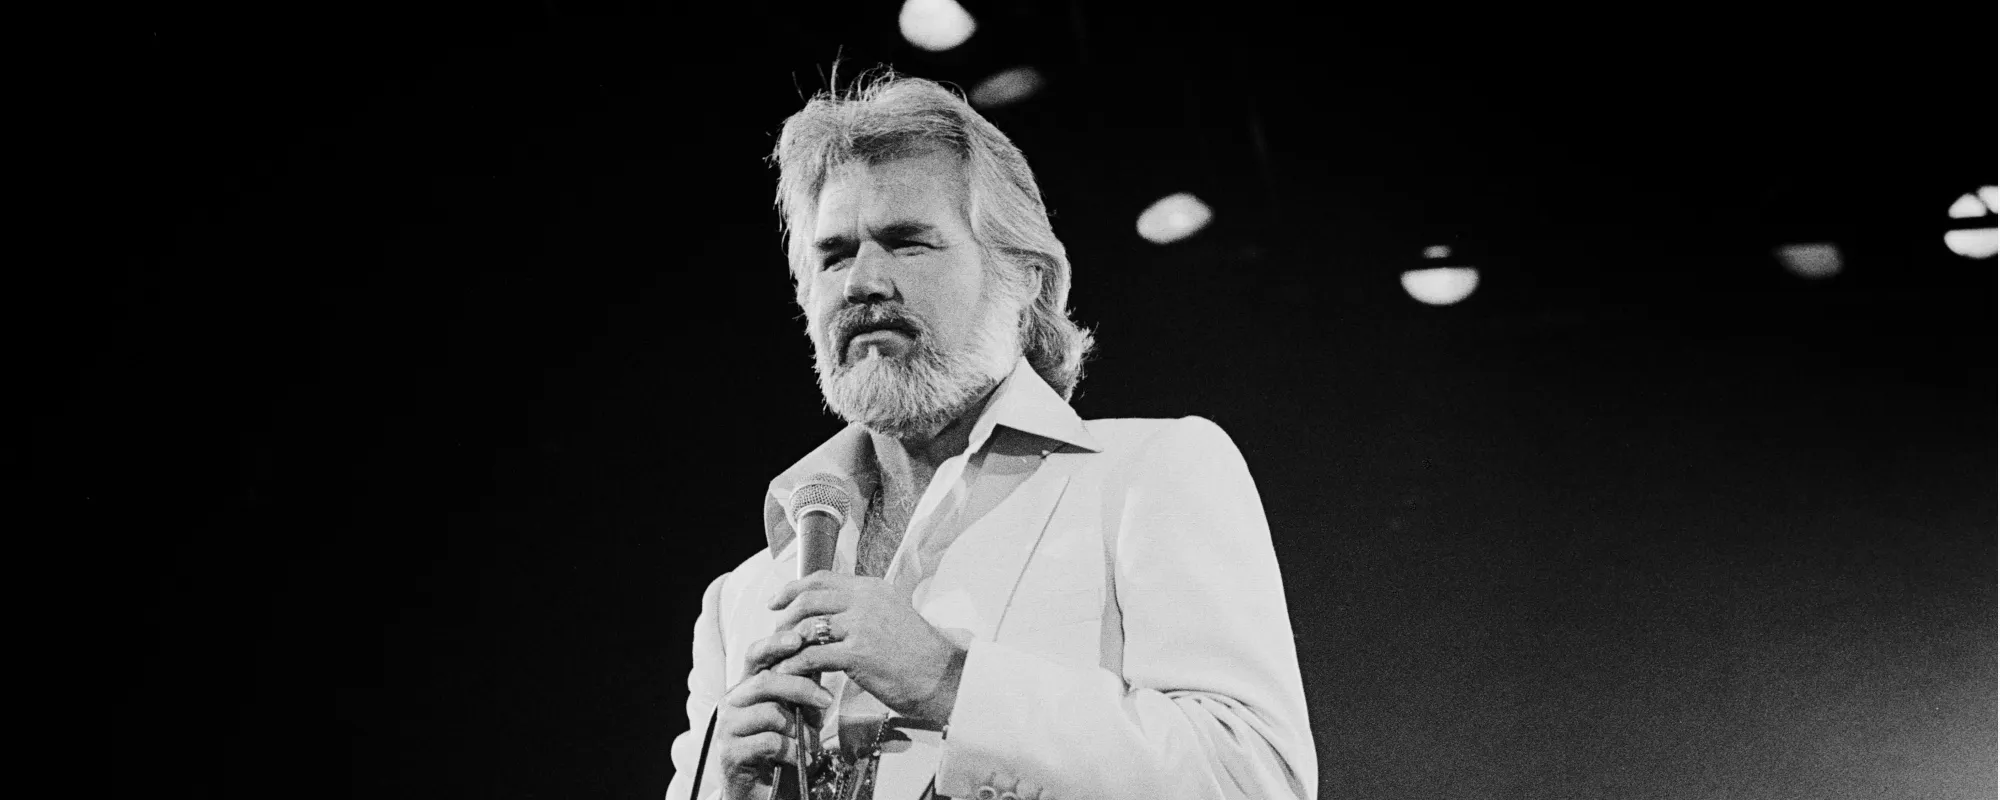 The Meaning Behind “Coward of the County” by Kenny Rogers